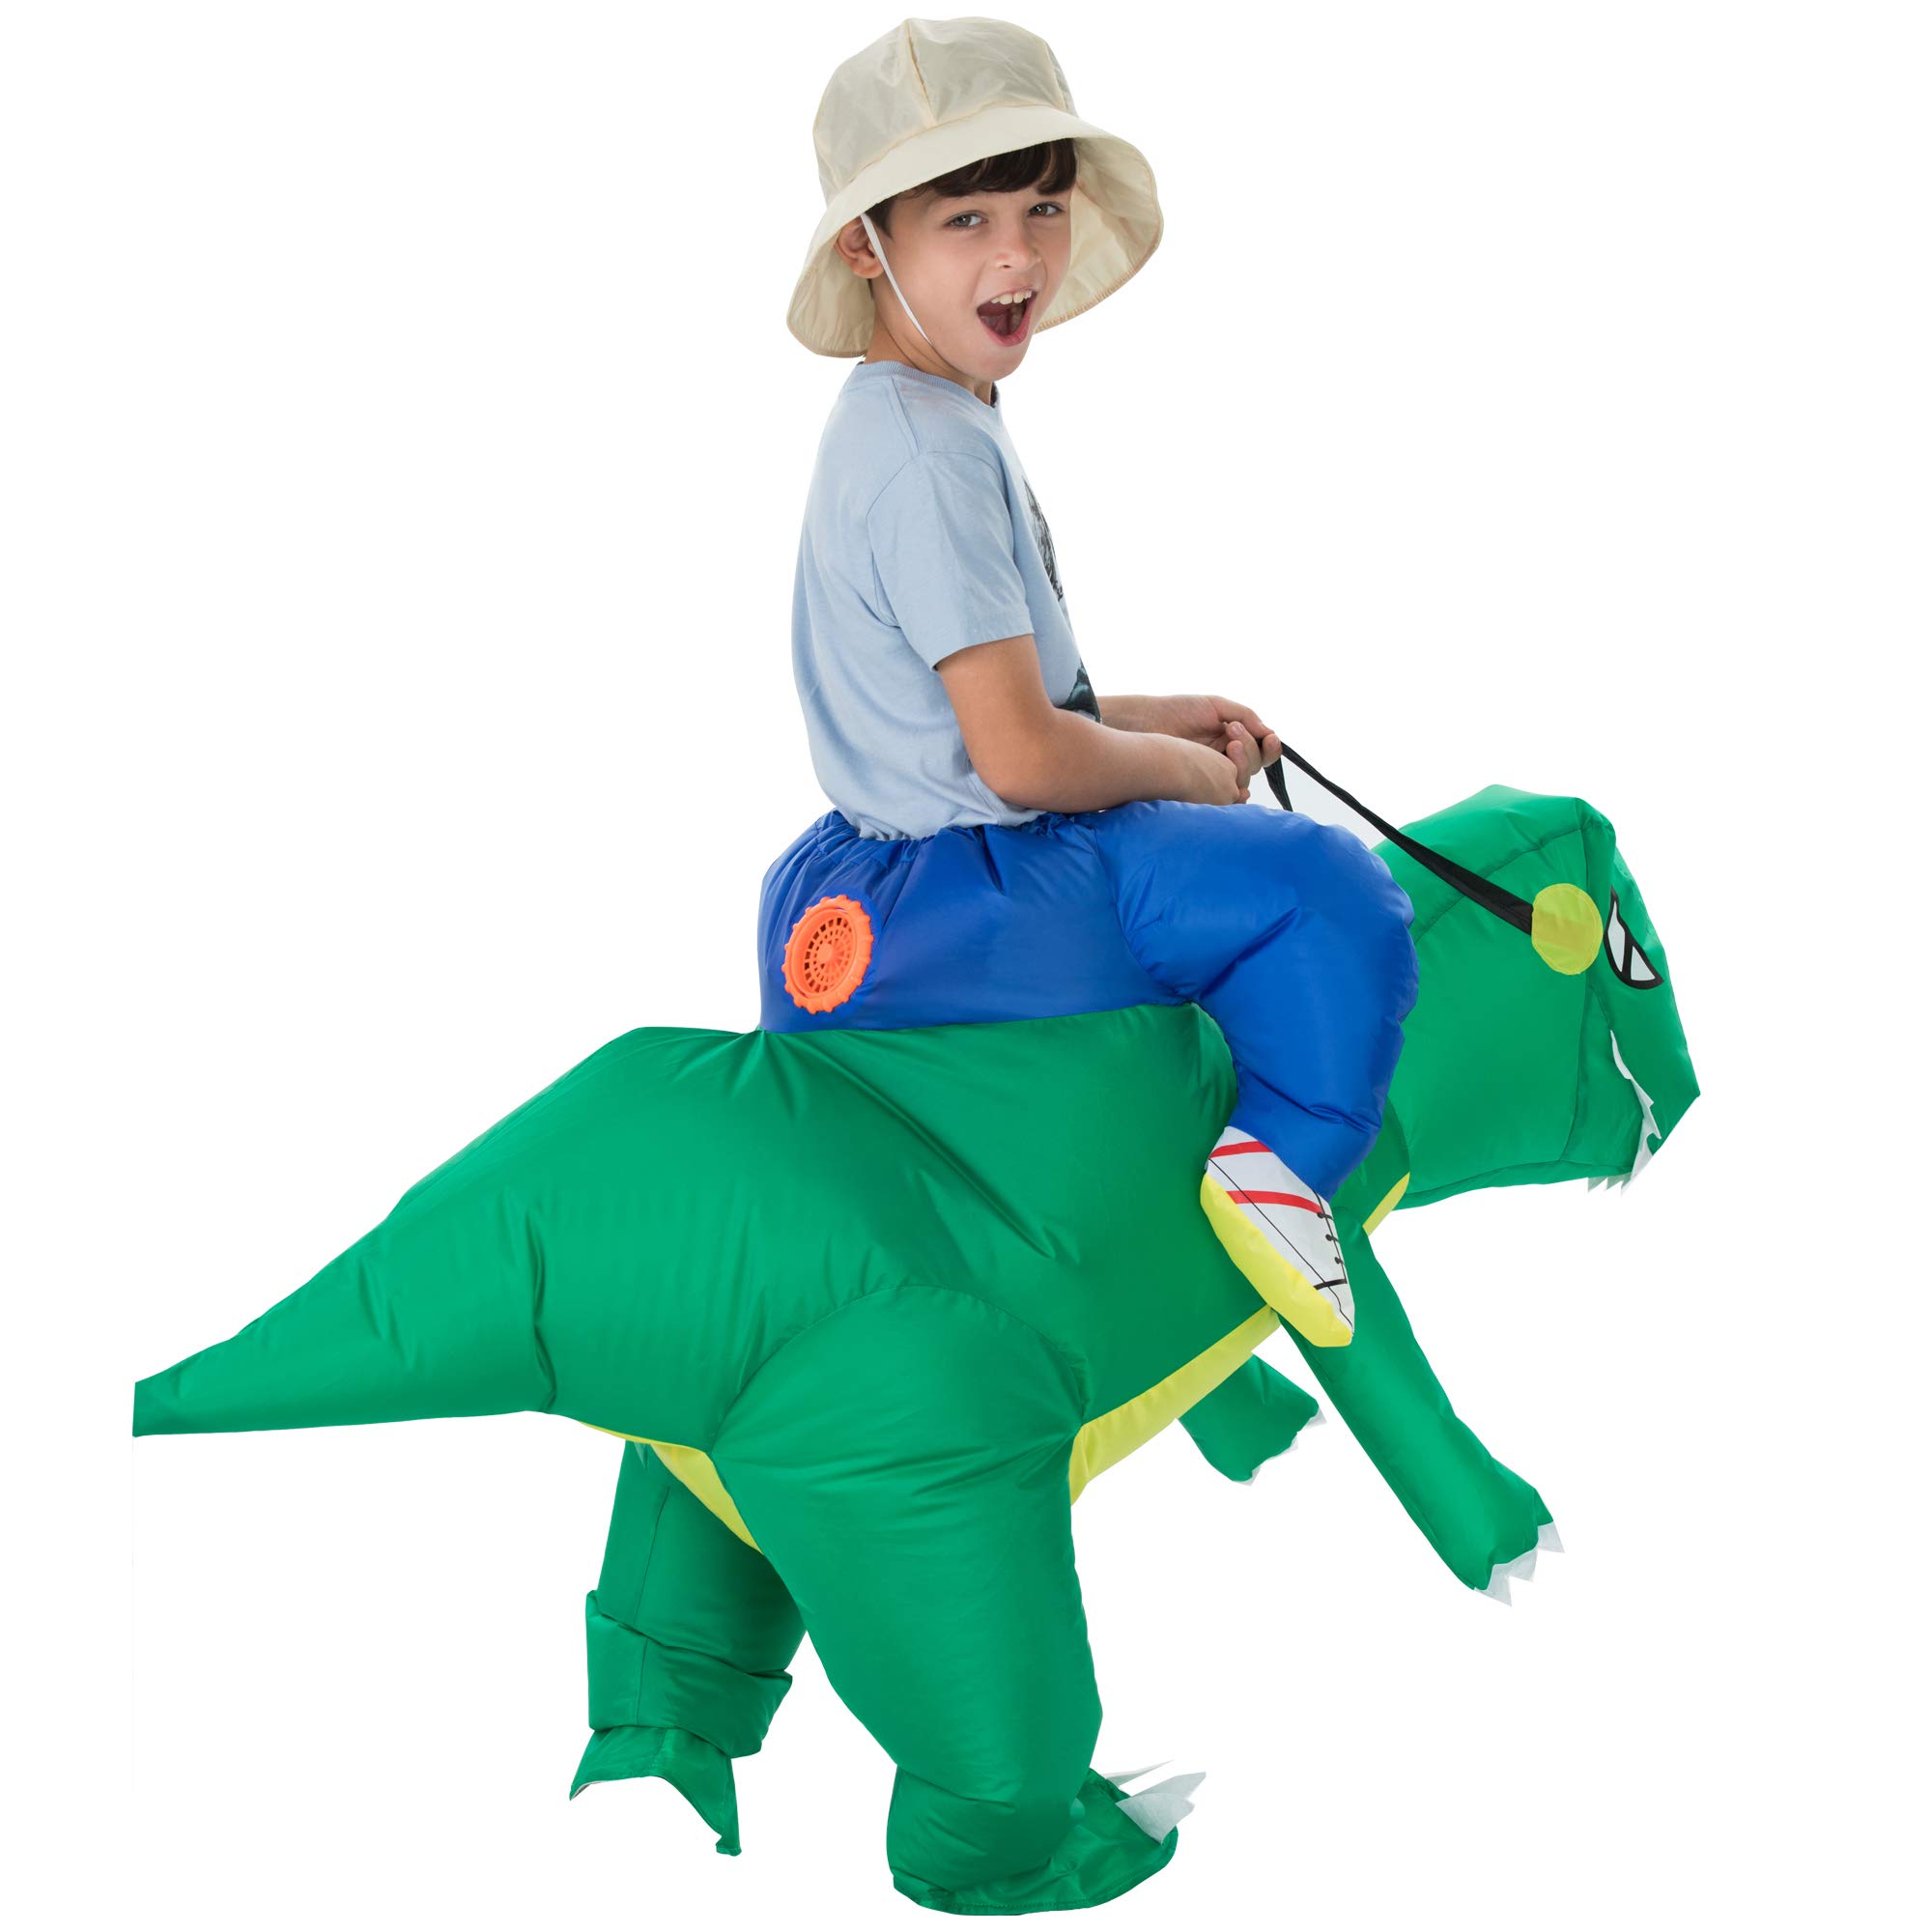 TOLOCO Inflatable Costume Kids, Inflatable Halloween Costumes, Inflatable Dinosaur Costume, Blow up Costumes